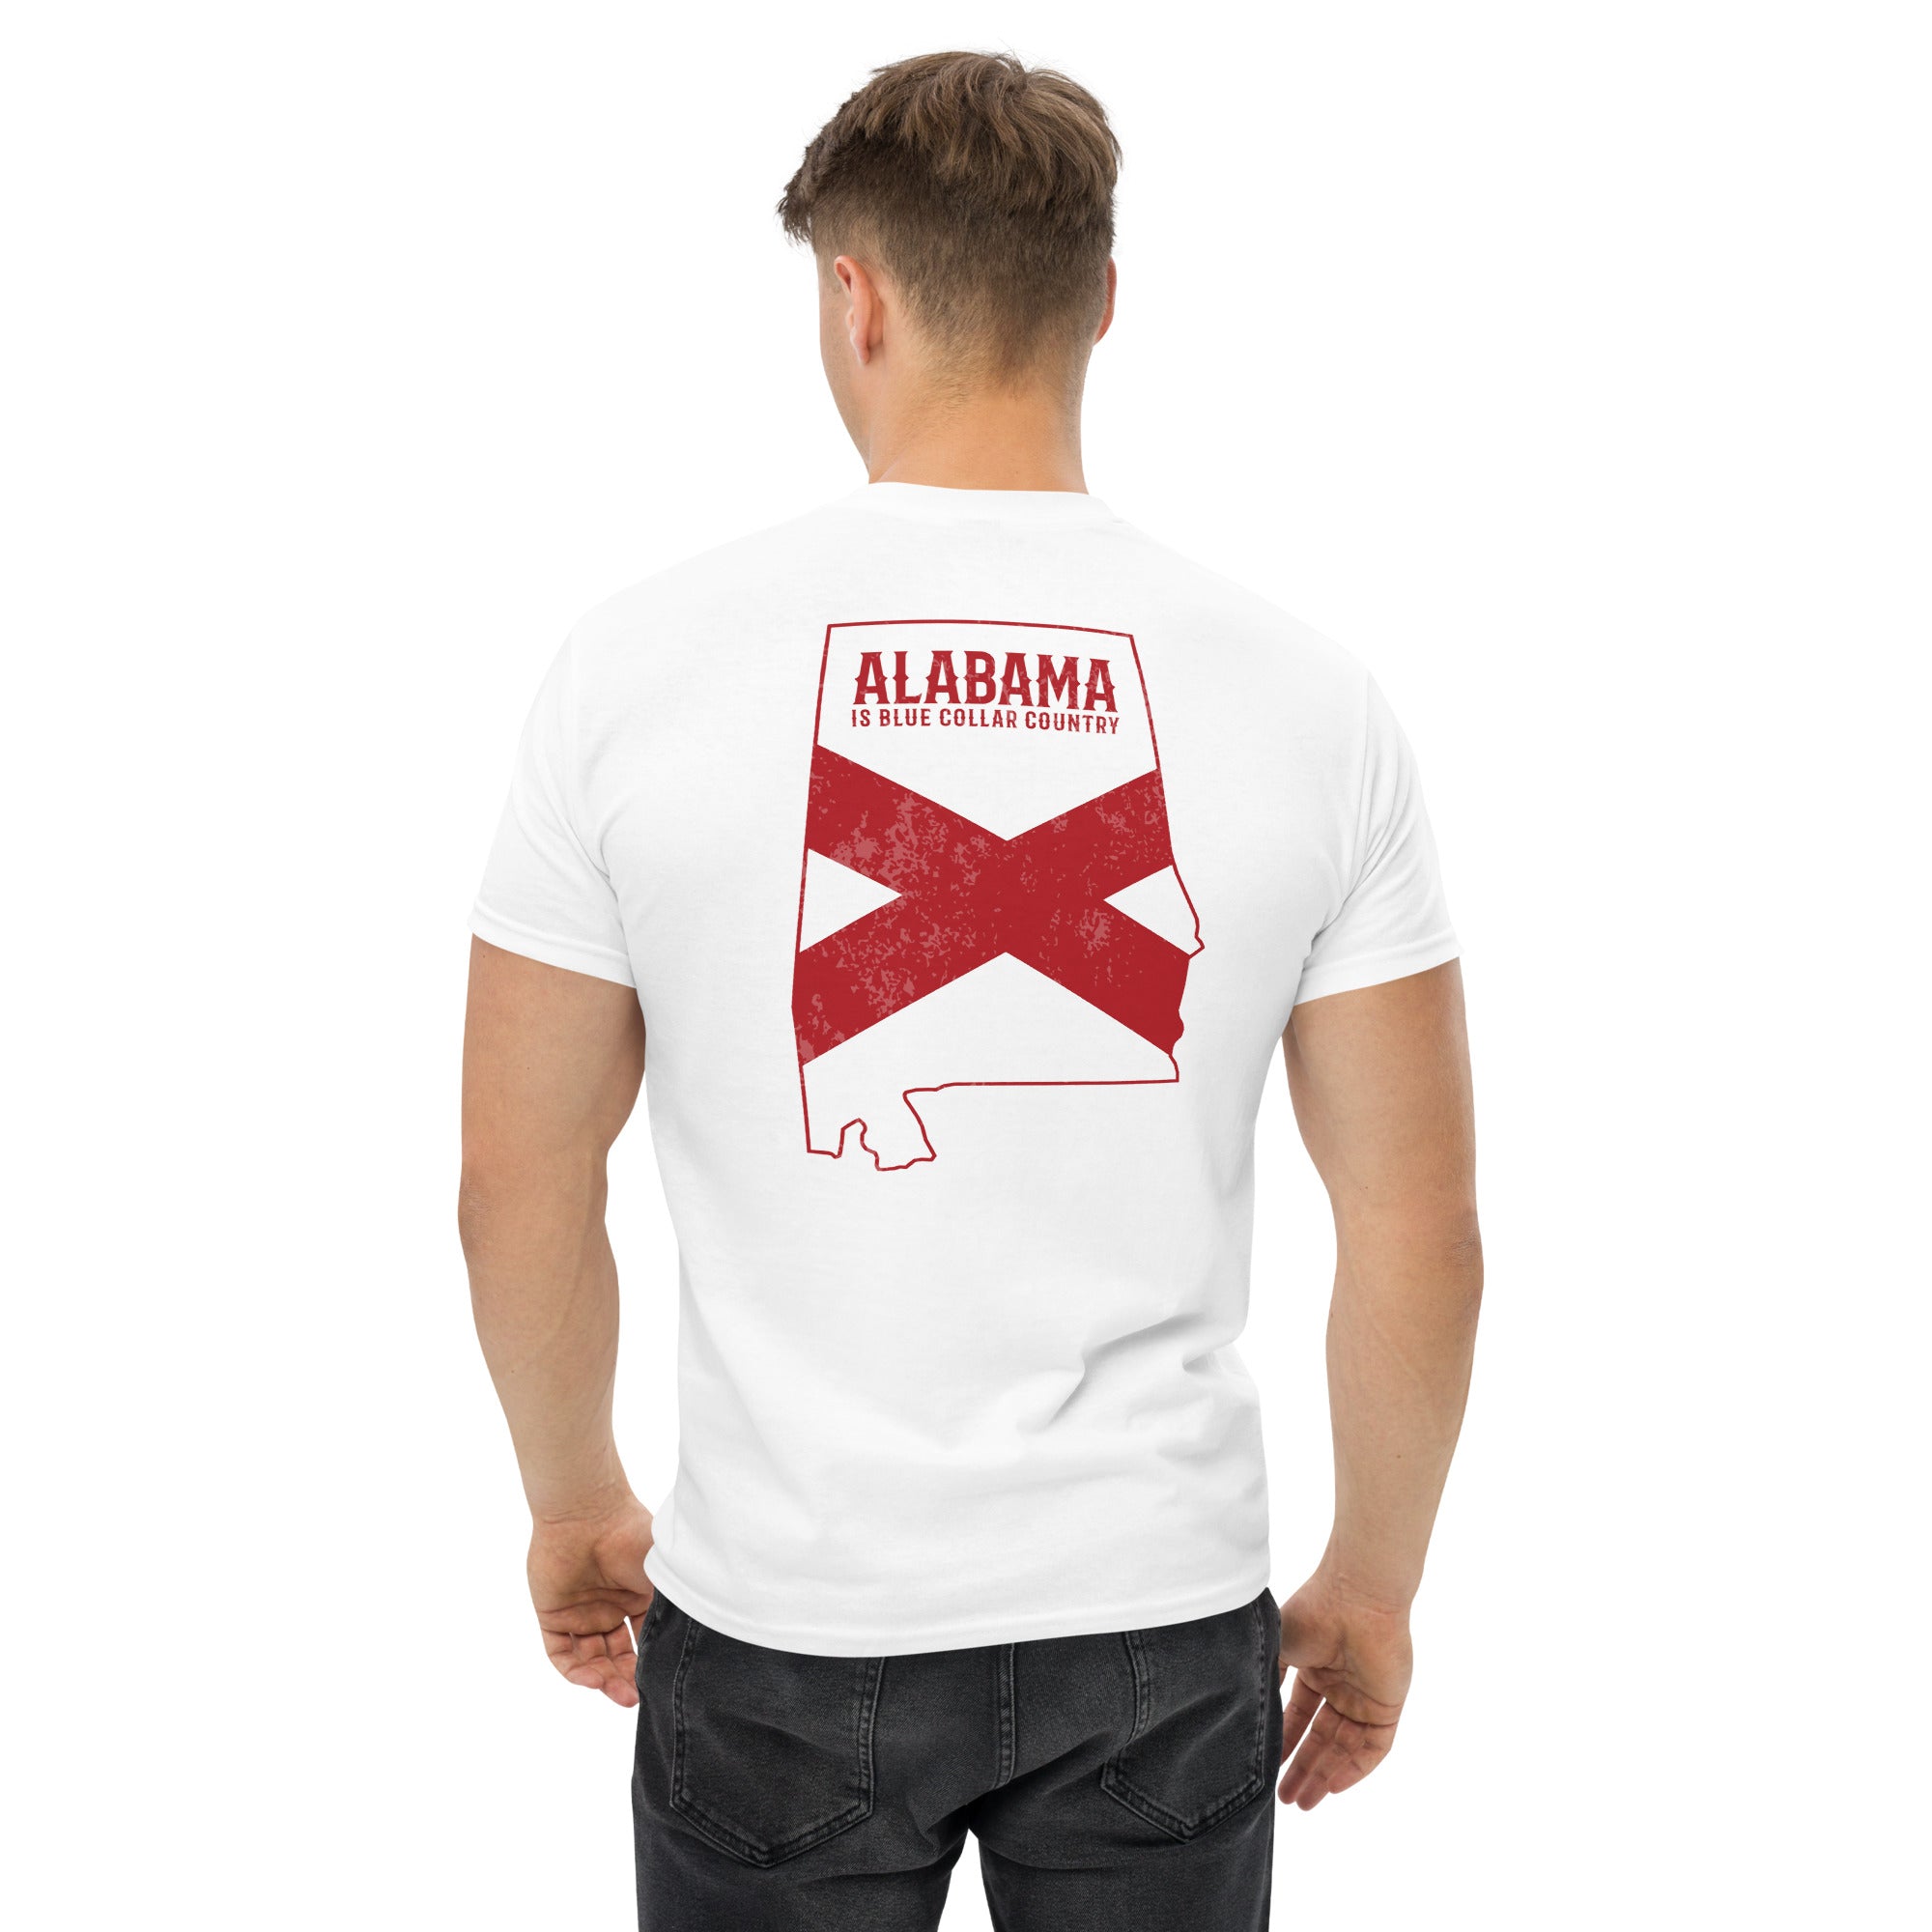 Alabama is Blue Collar Country  I  Men's classic tee